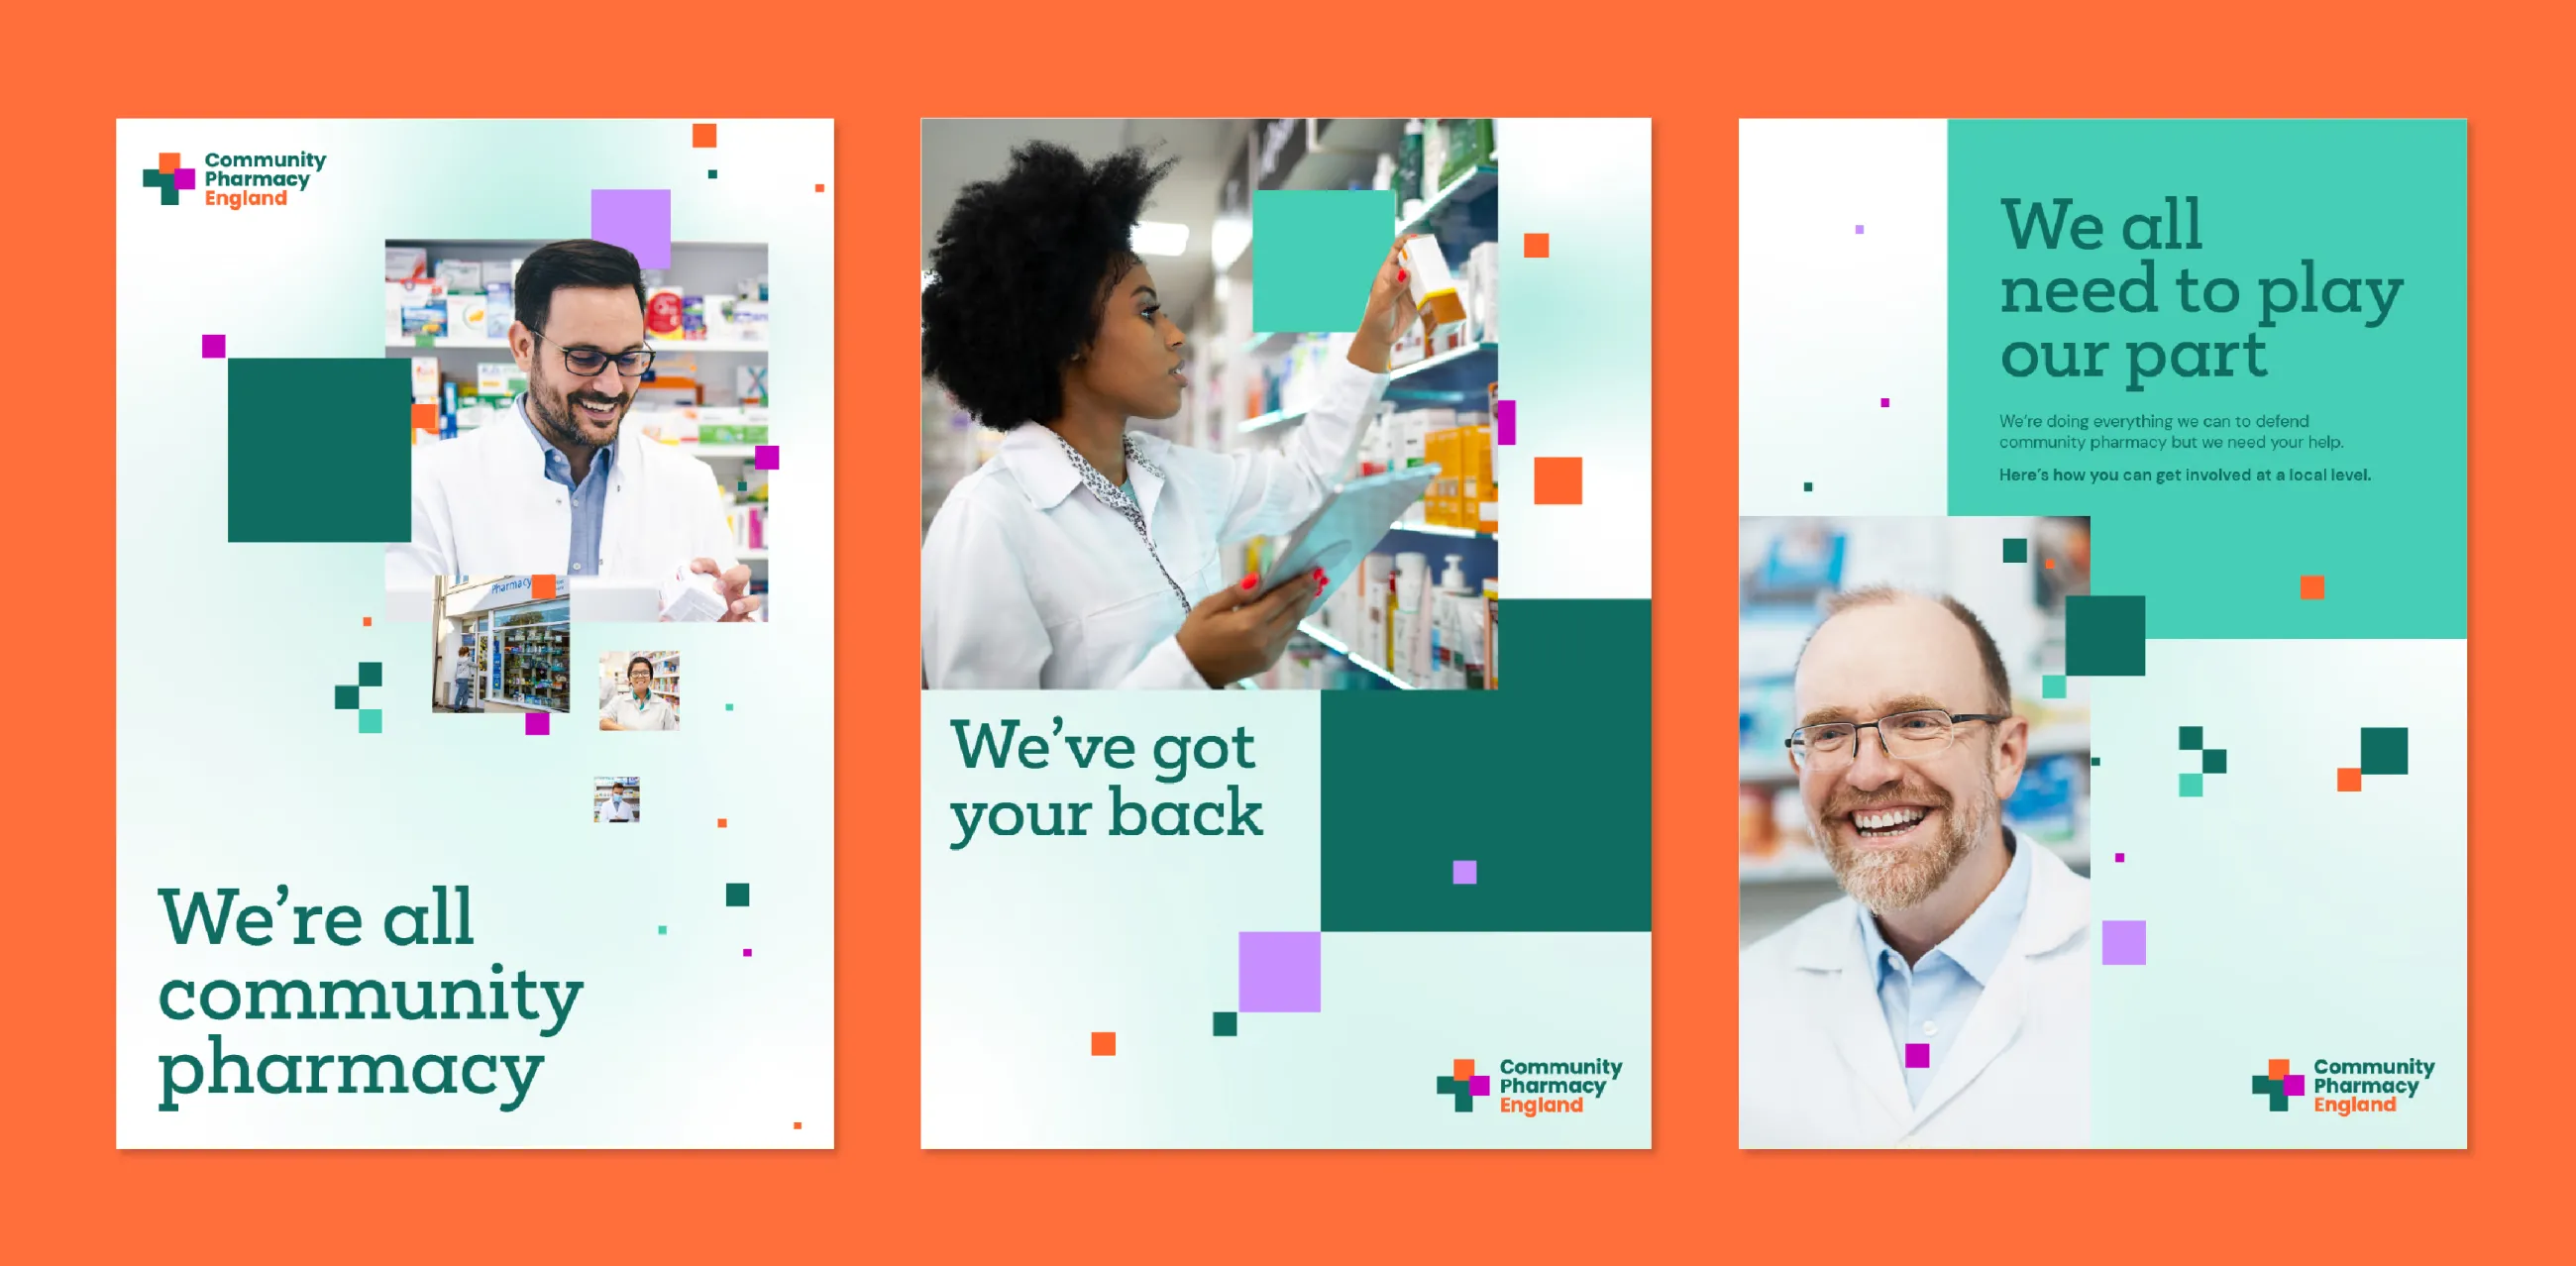 Community Pharmacy England series of posters